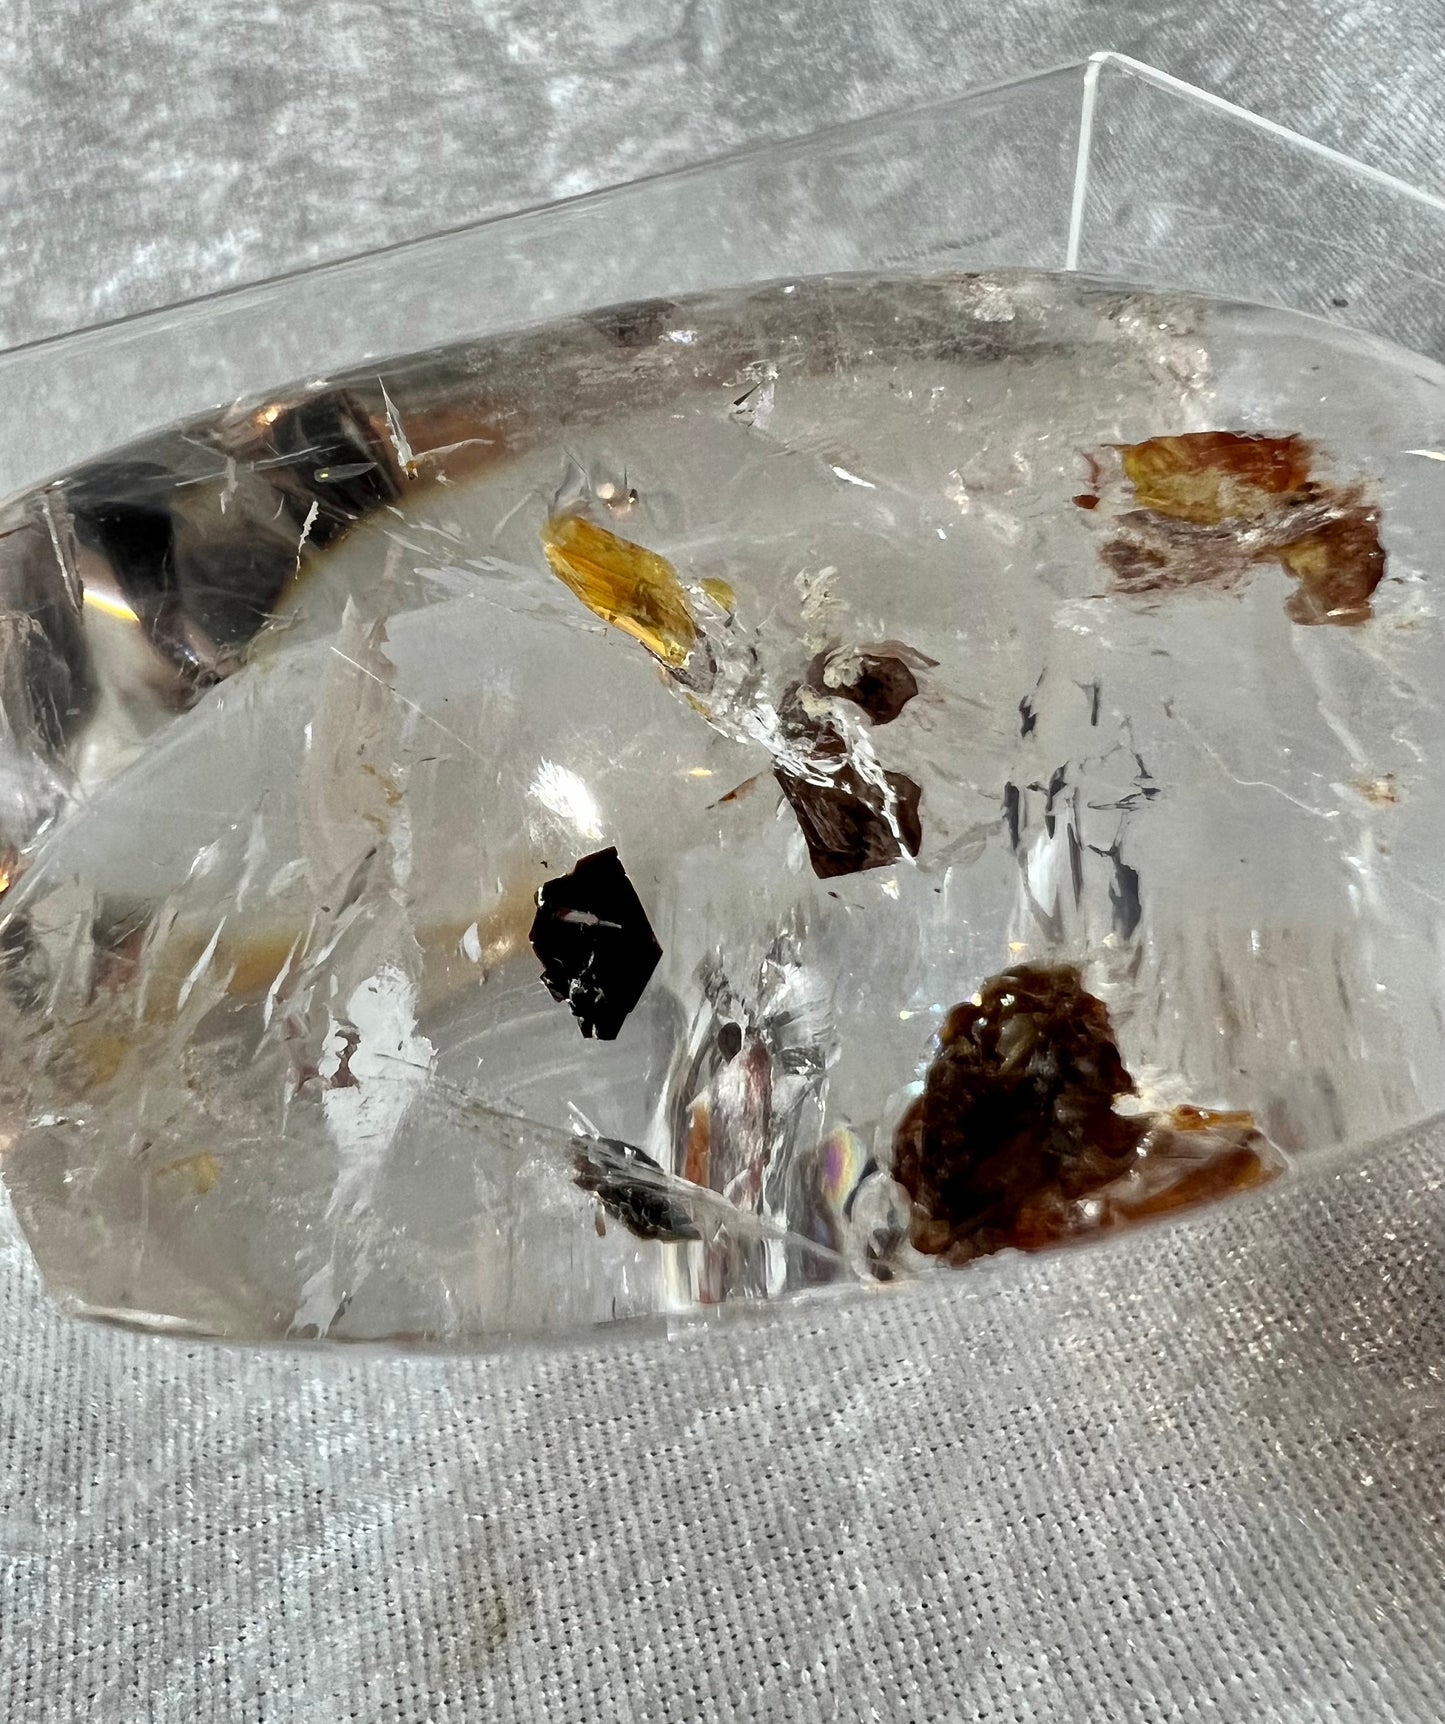 Rare Garden Quartz With Mica, Golden Healer, And Rainbows. Very High Quality Crystal.